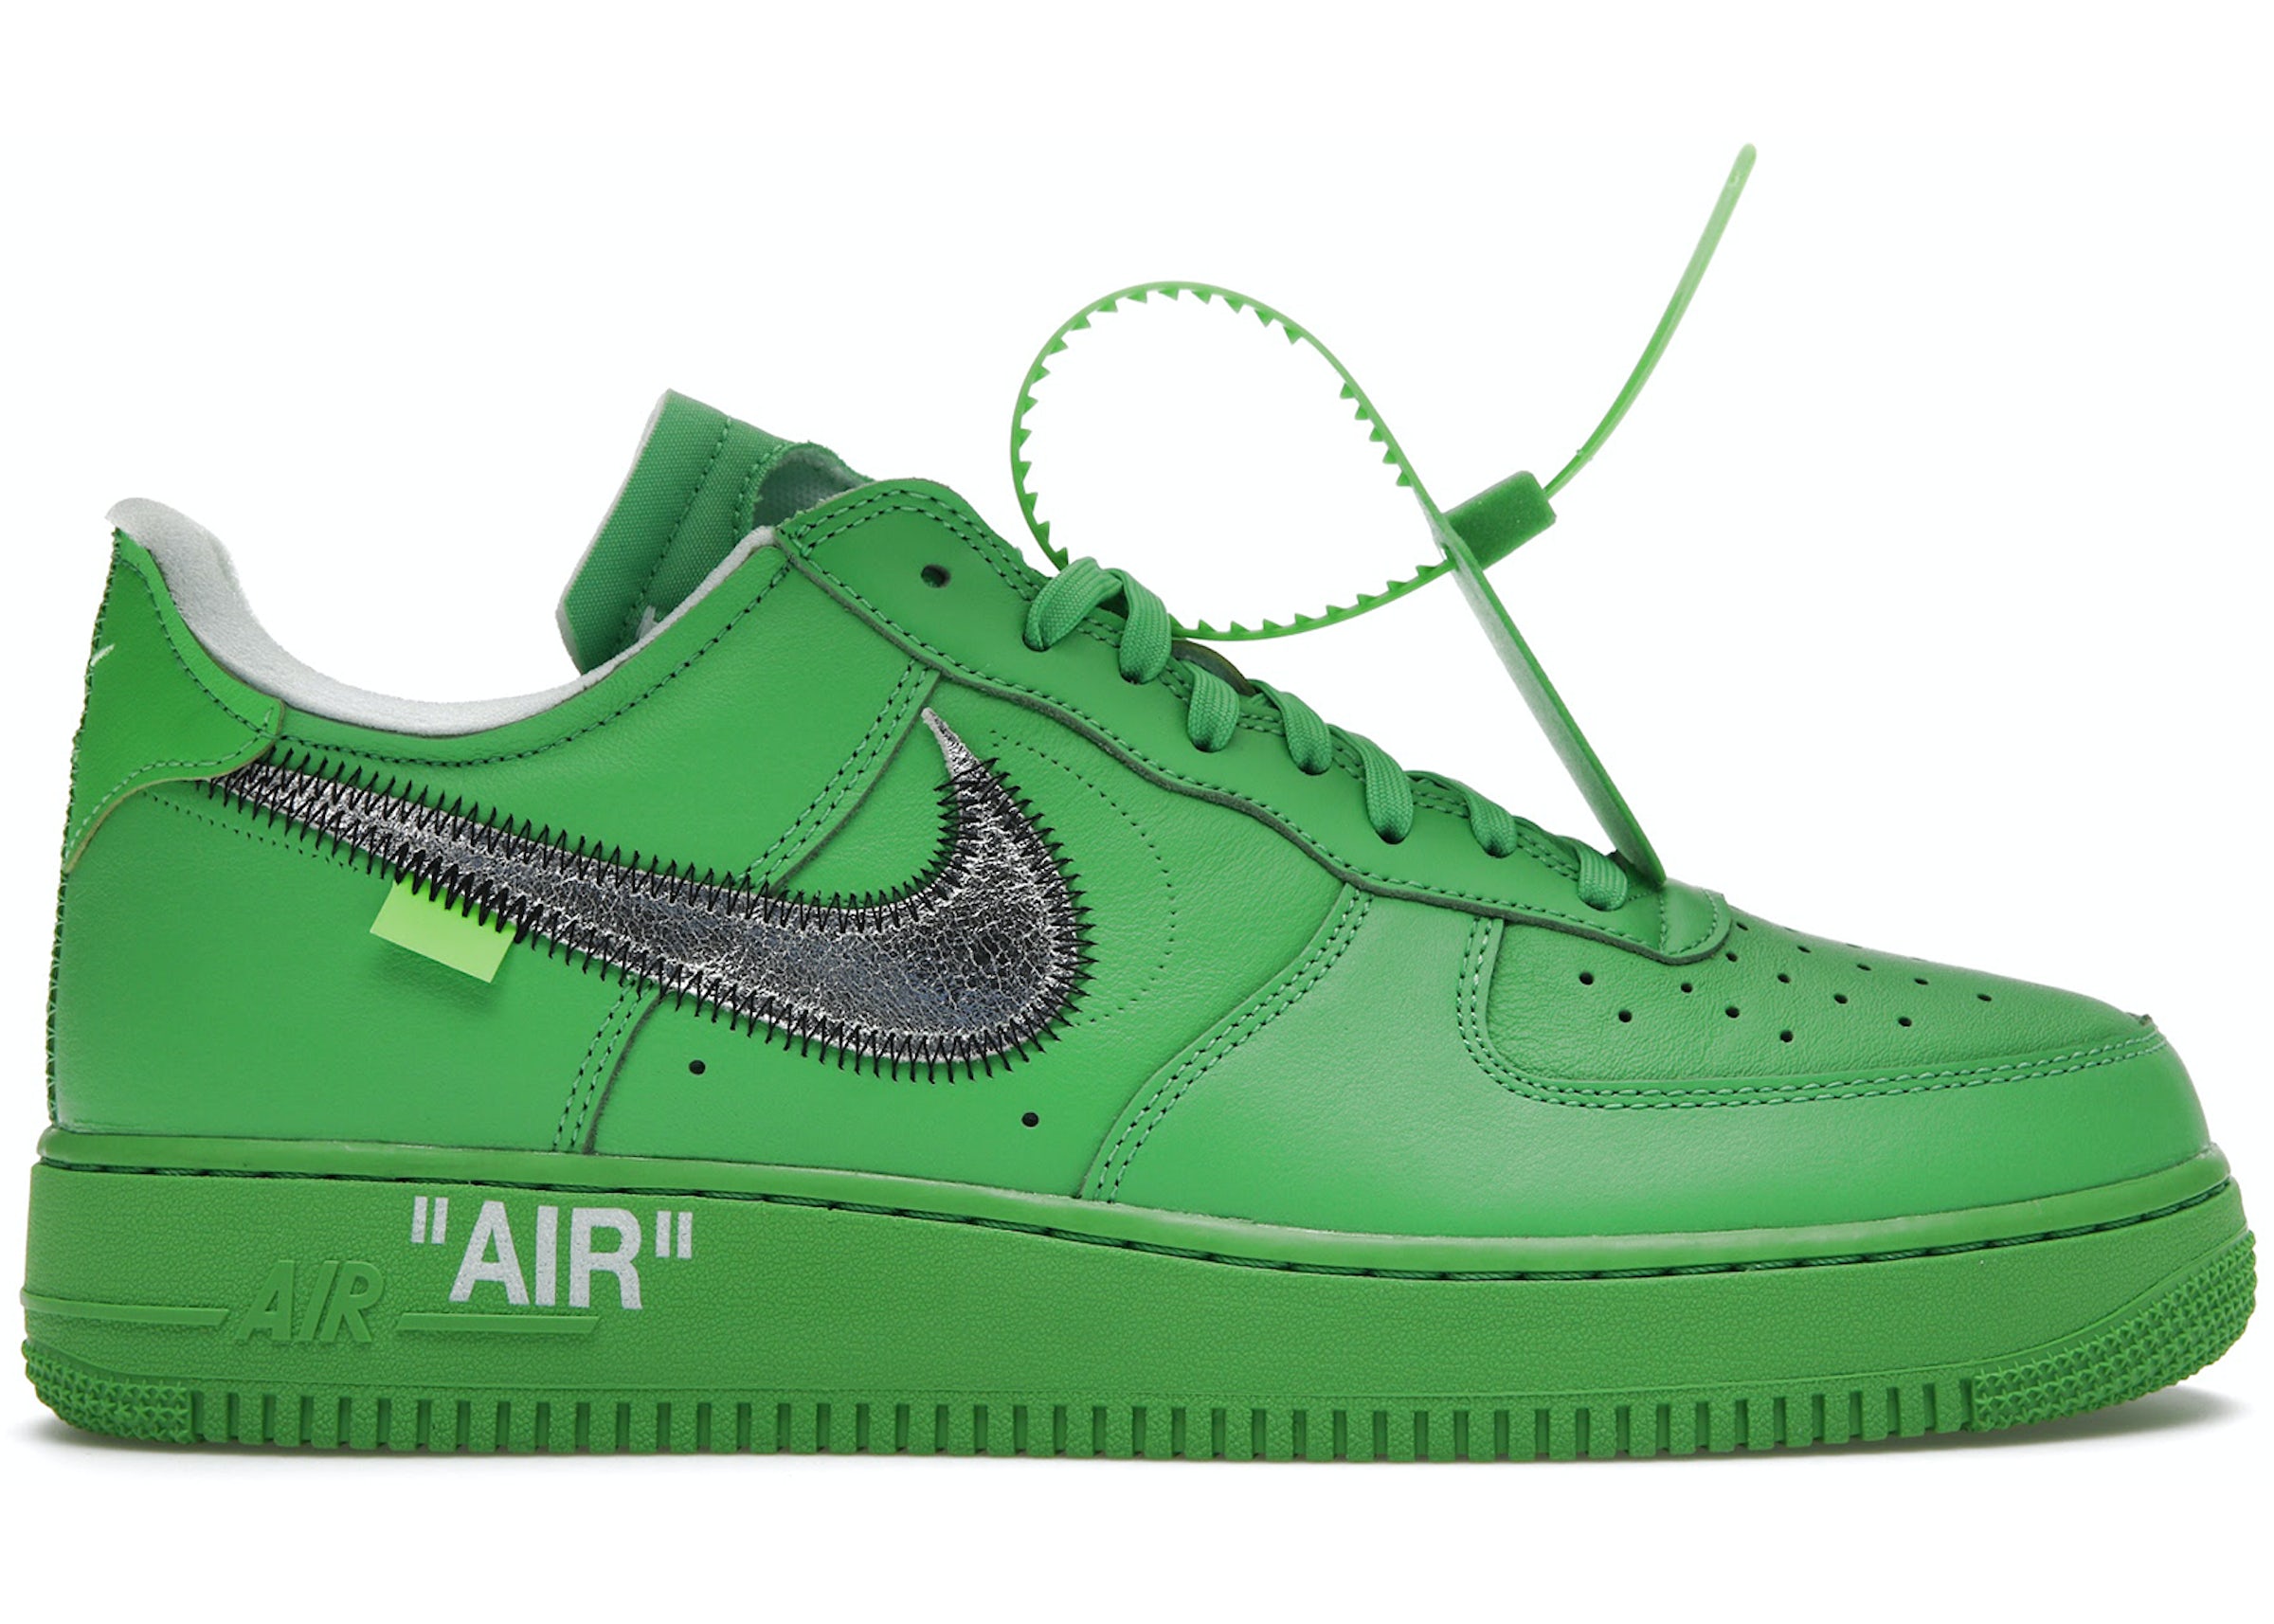 Nike Air Force 1 Low Off-White Brooklyn Men's - DX1419-300 - US